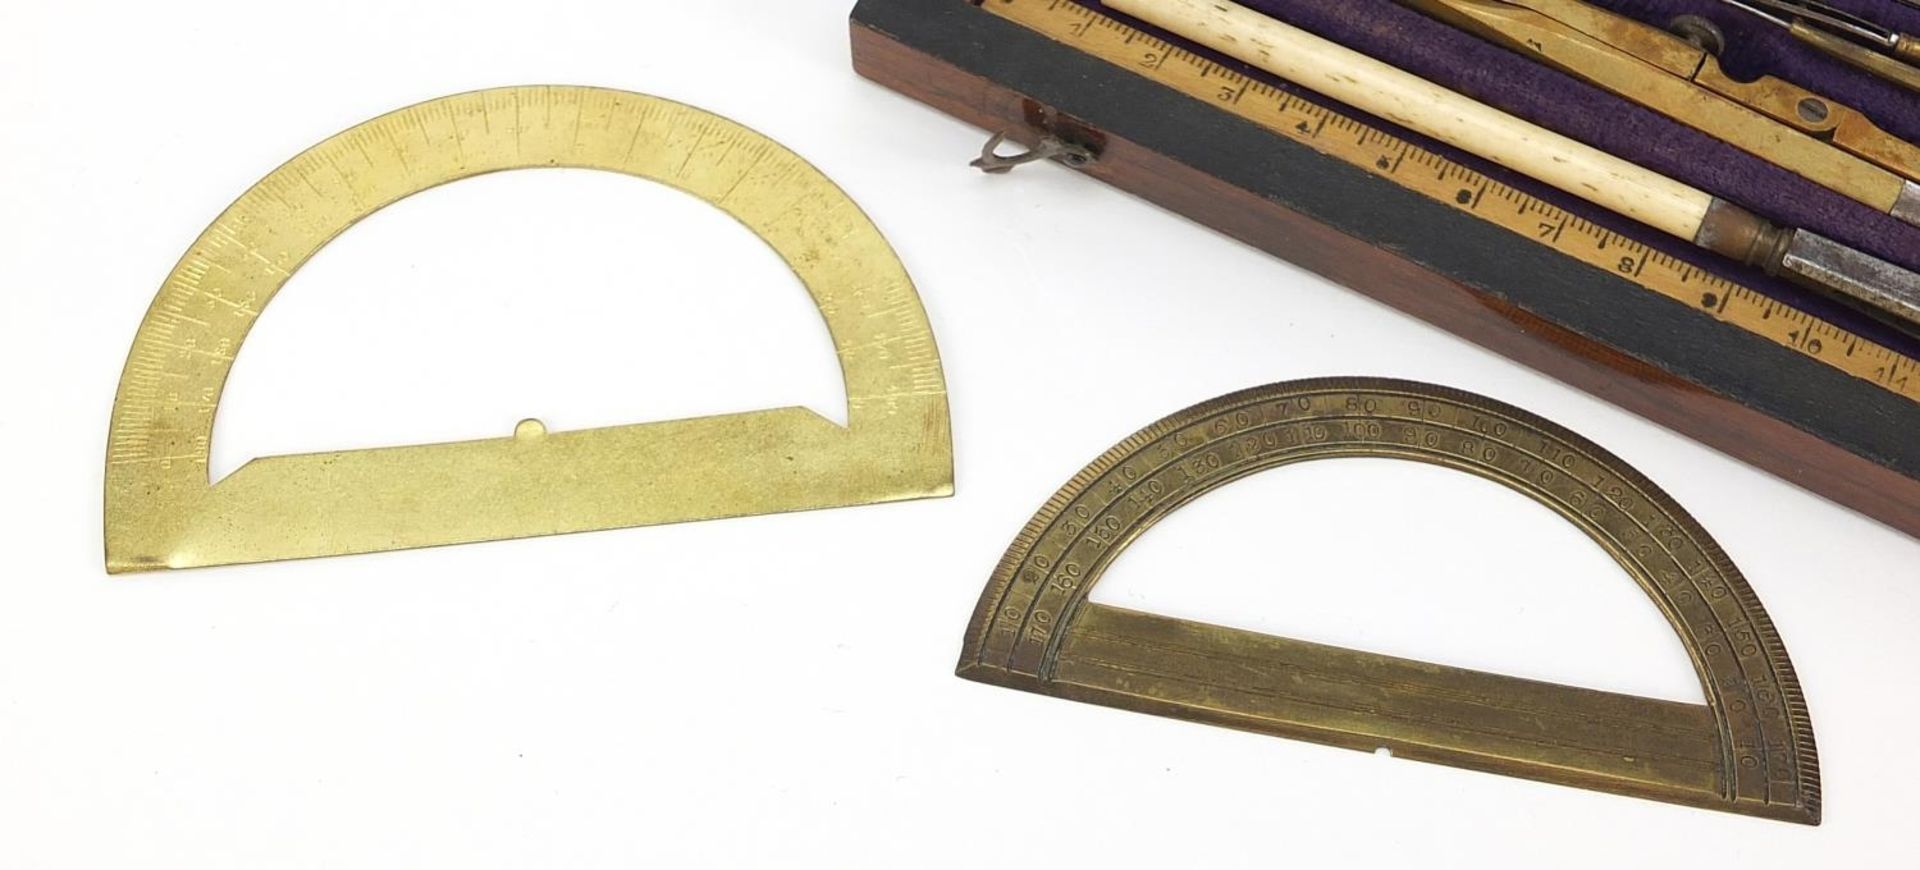 Early 19th century rosewood drawing set with implements including two protractors, 20cm wide - Image 3 of 4